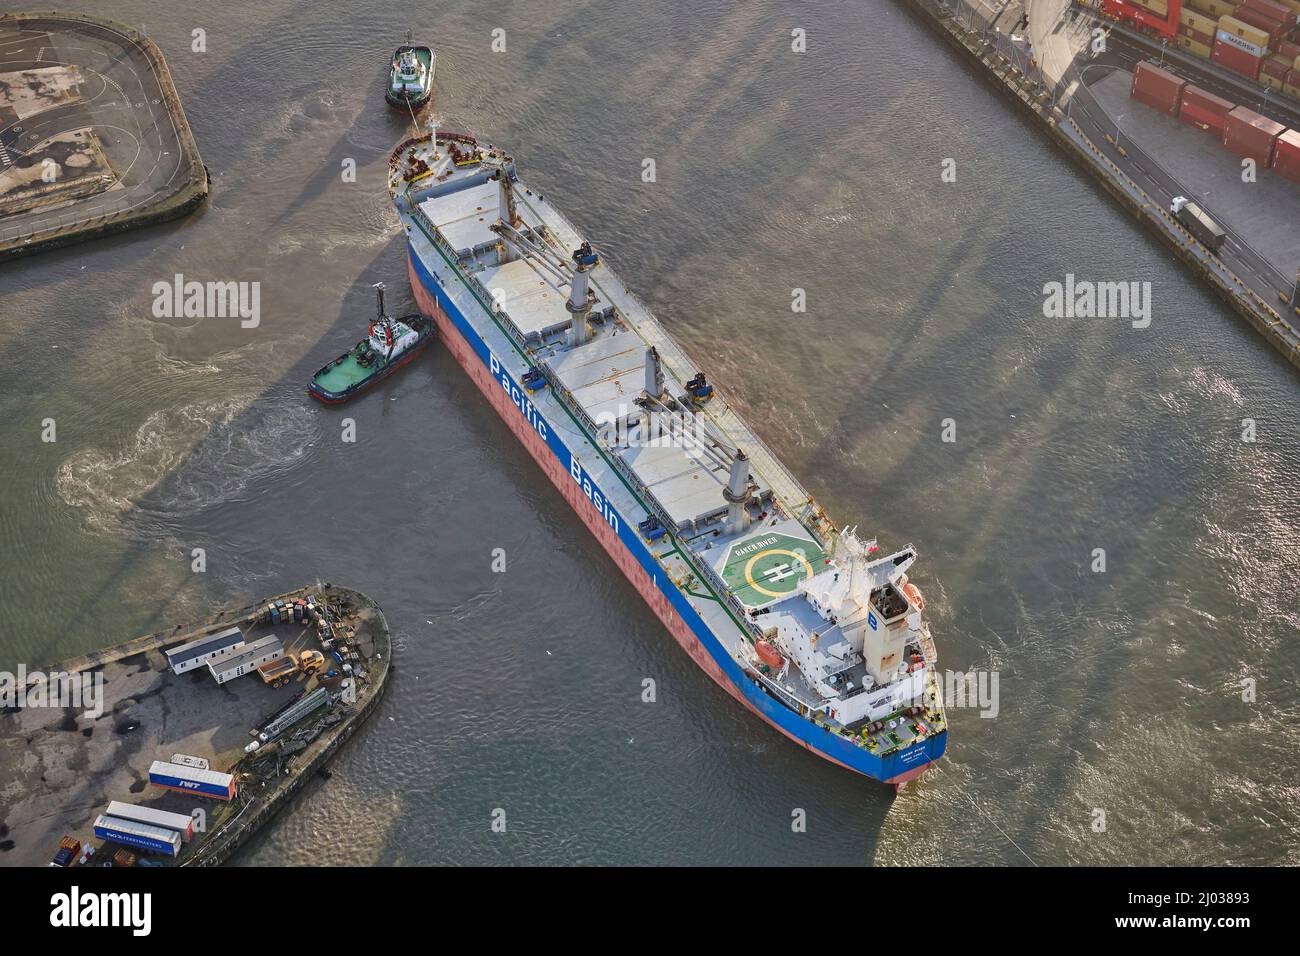 Ship docking at Seaforth Docks, Liverpool, being manoeuvered by two tug boats, Merseyside, North West England, UK Stock Photo